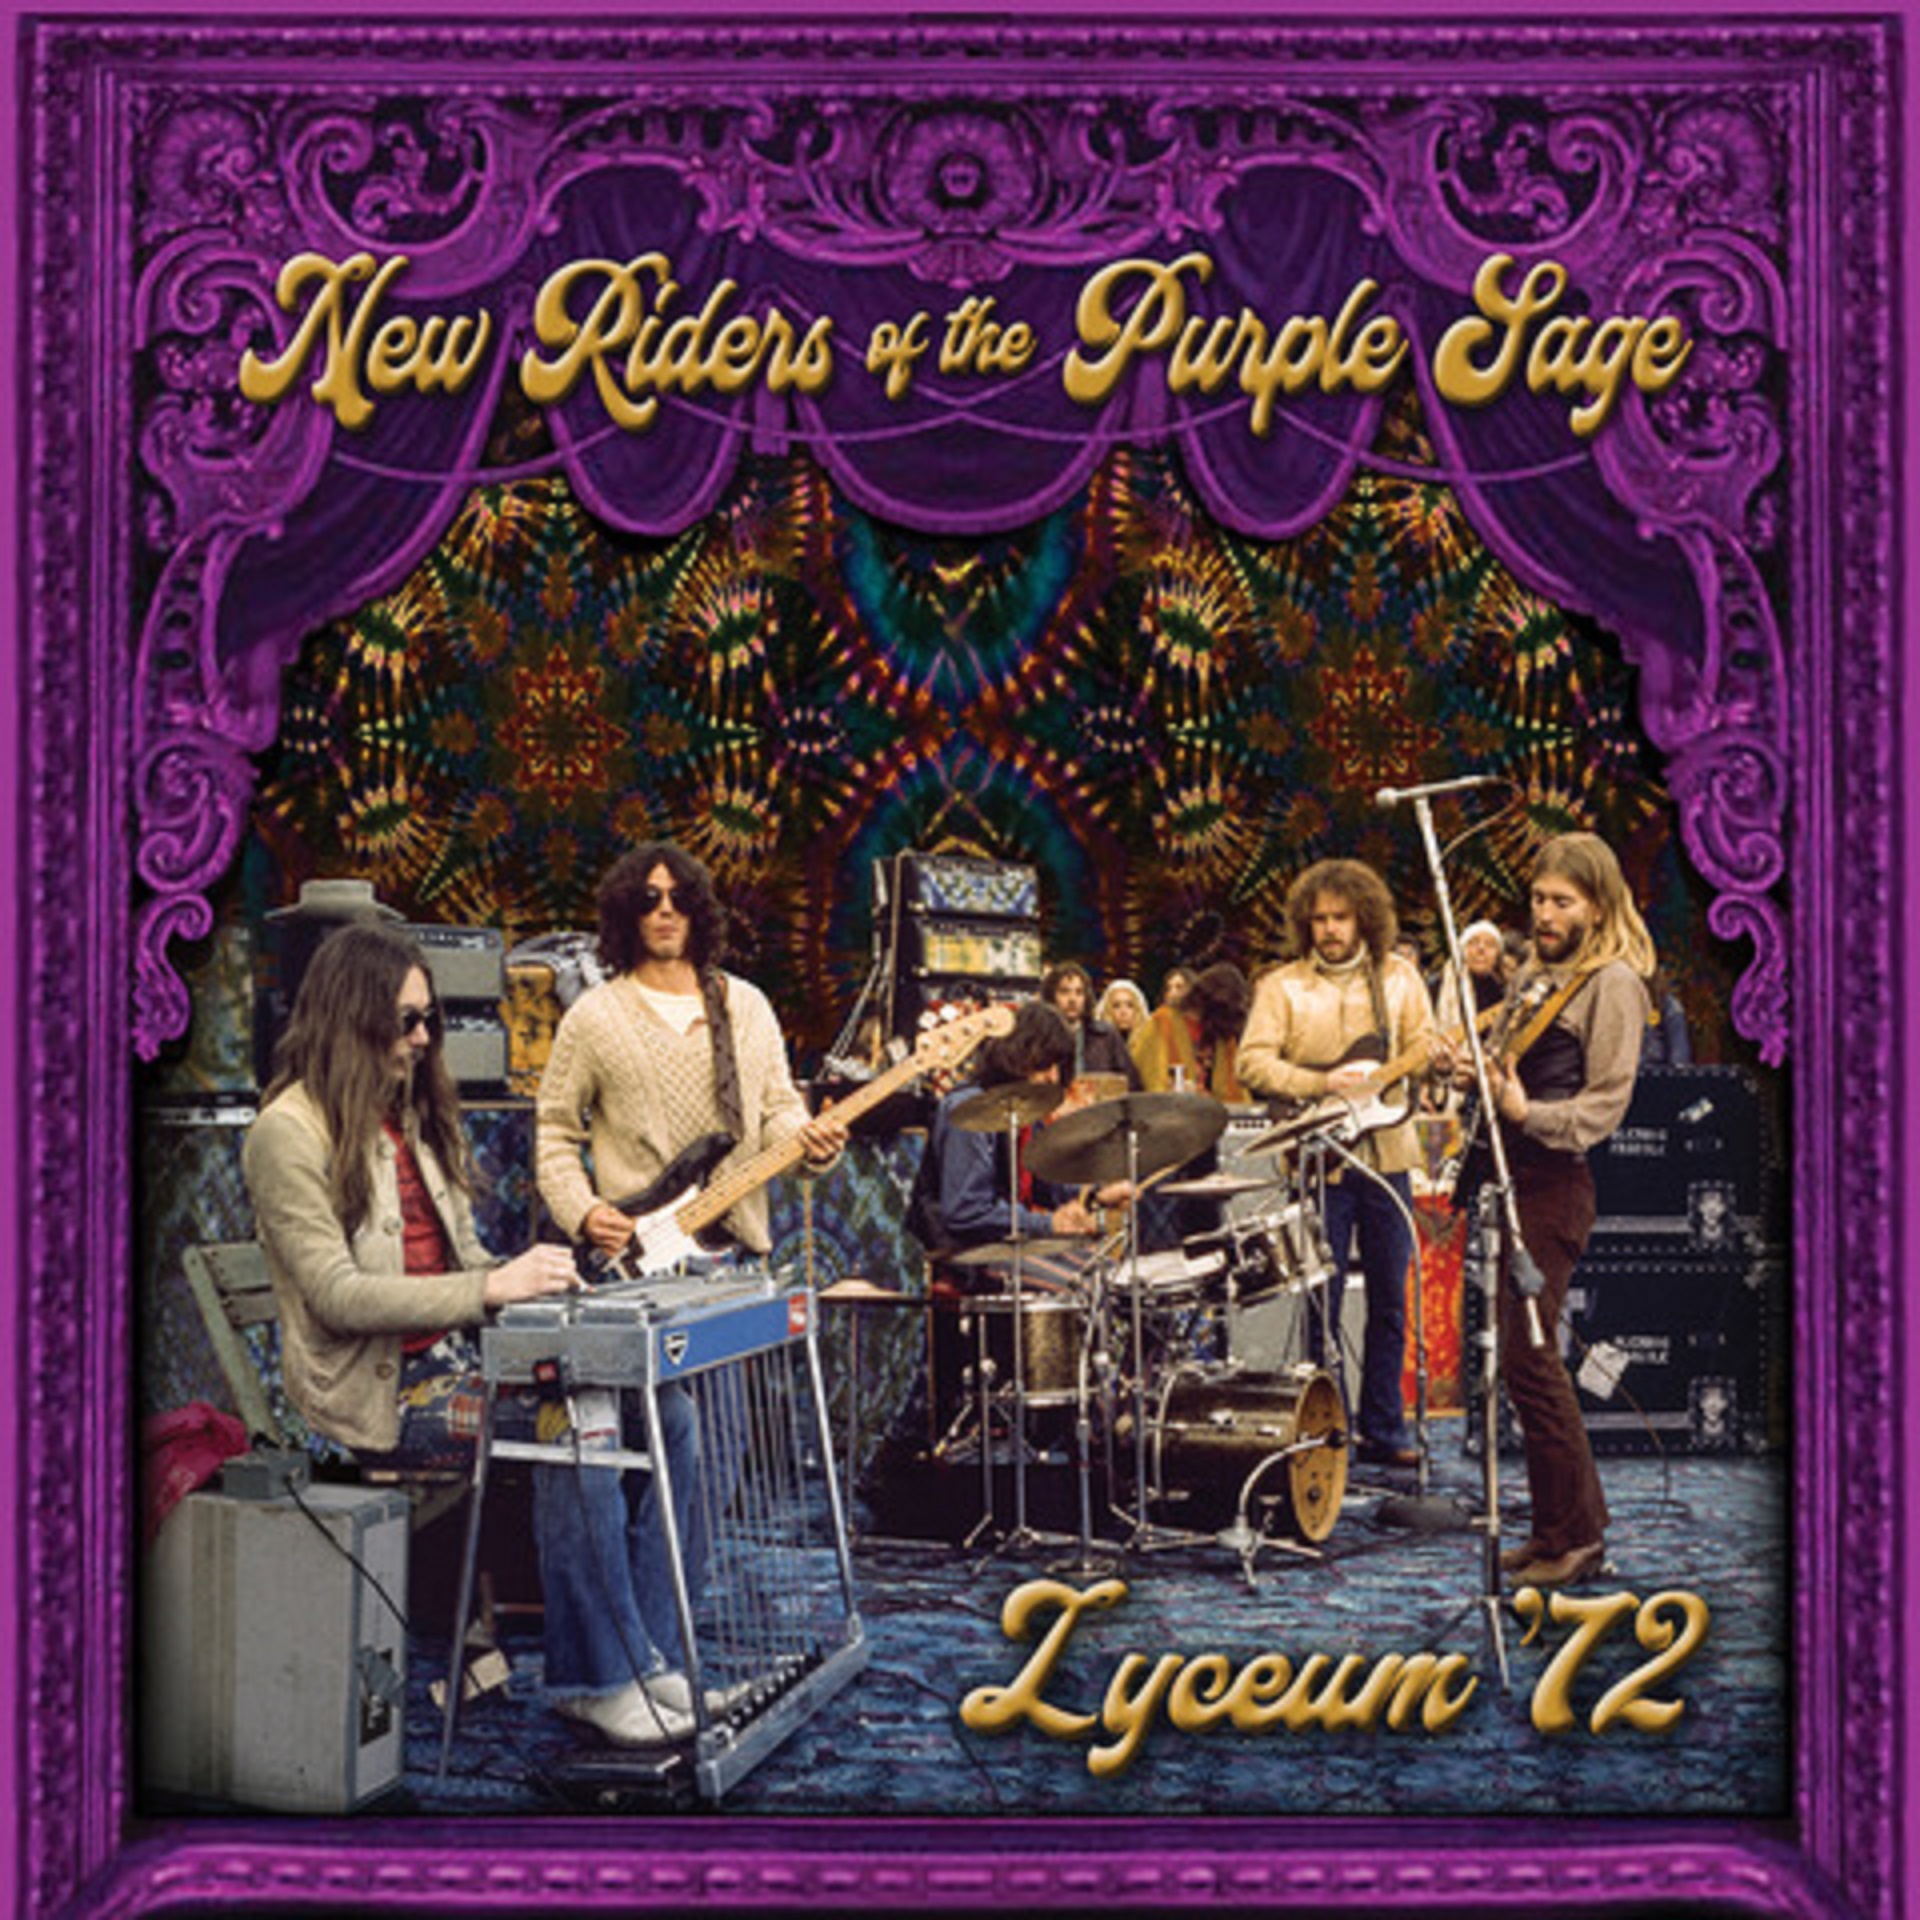 New Riders of the Purple Sage Announce New Live Album Lyceum ‘72 out September 23